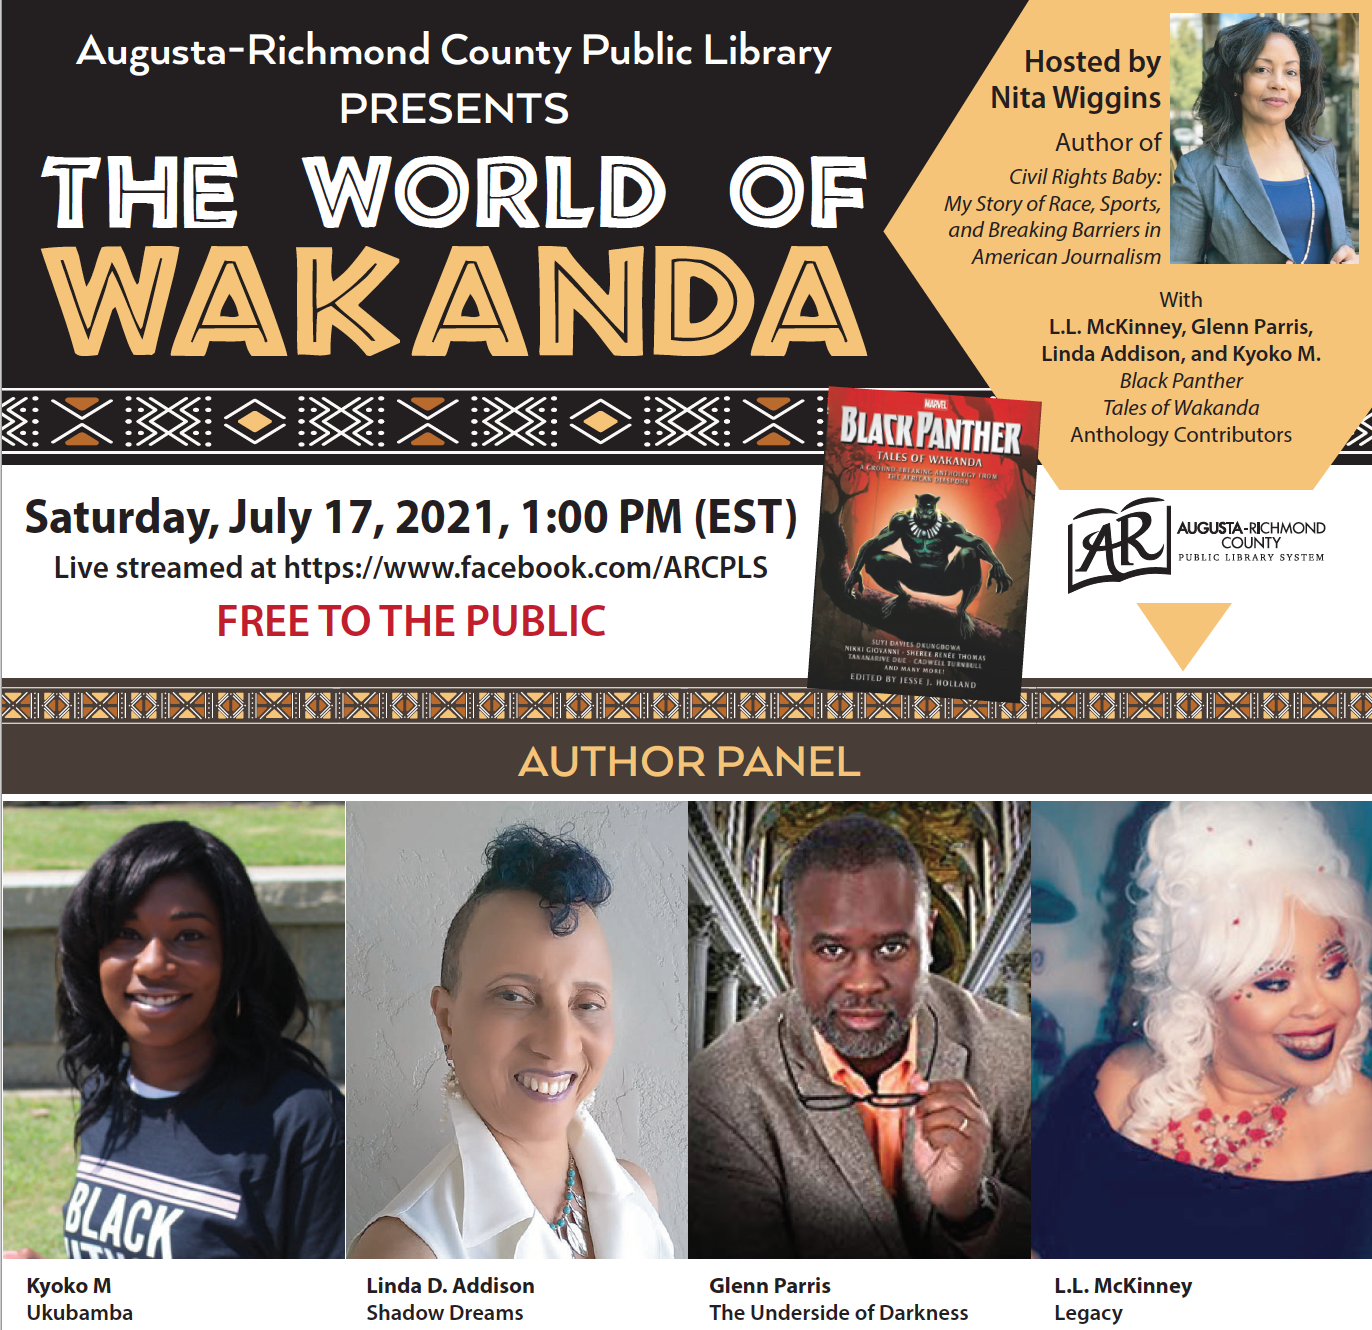 event flyer with author photos